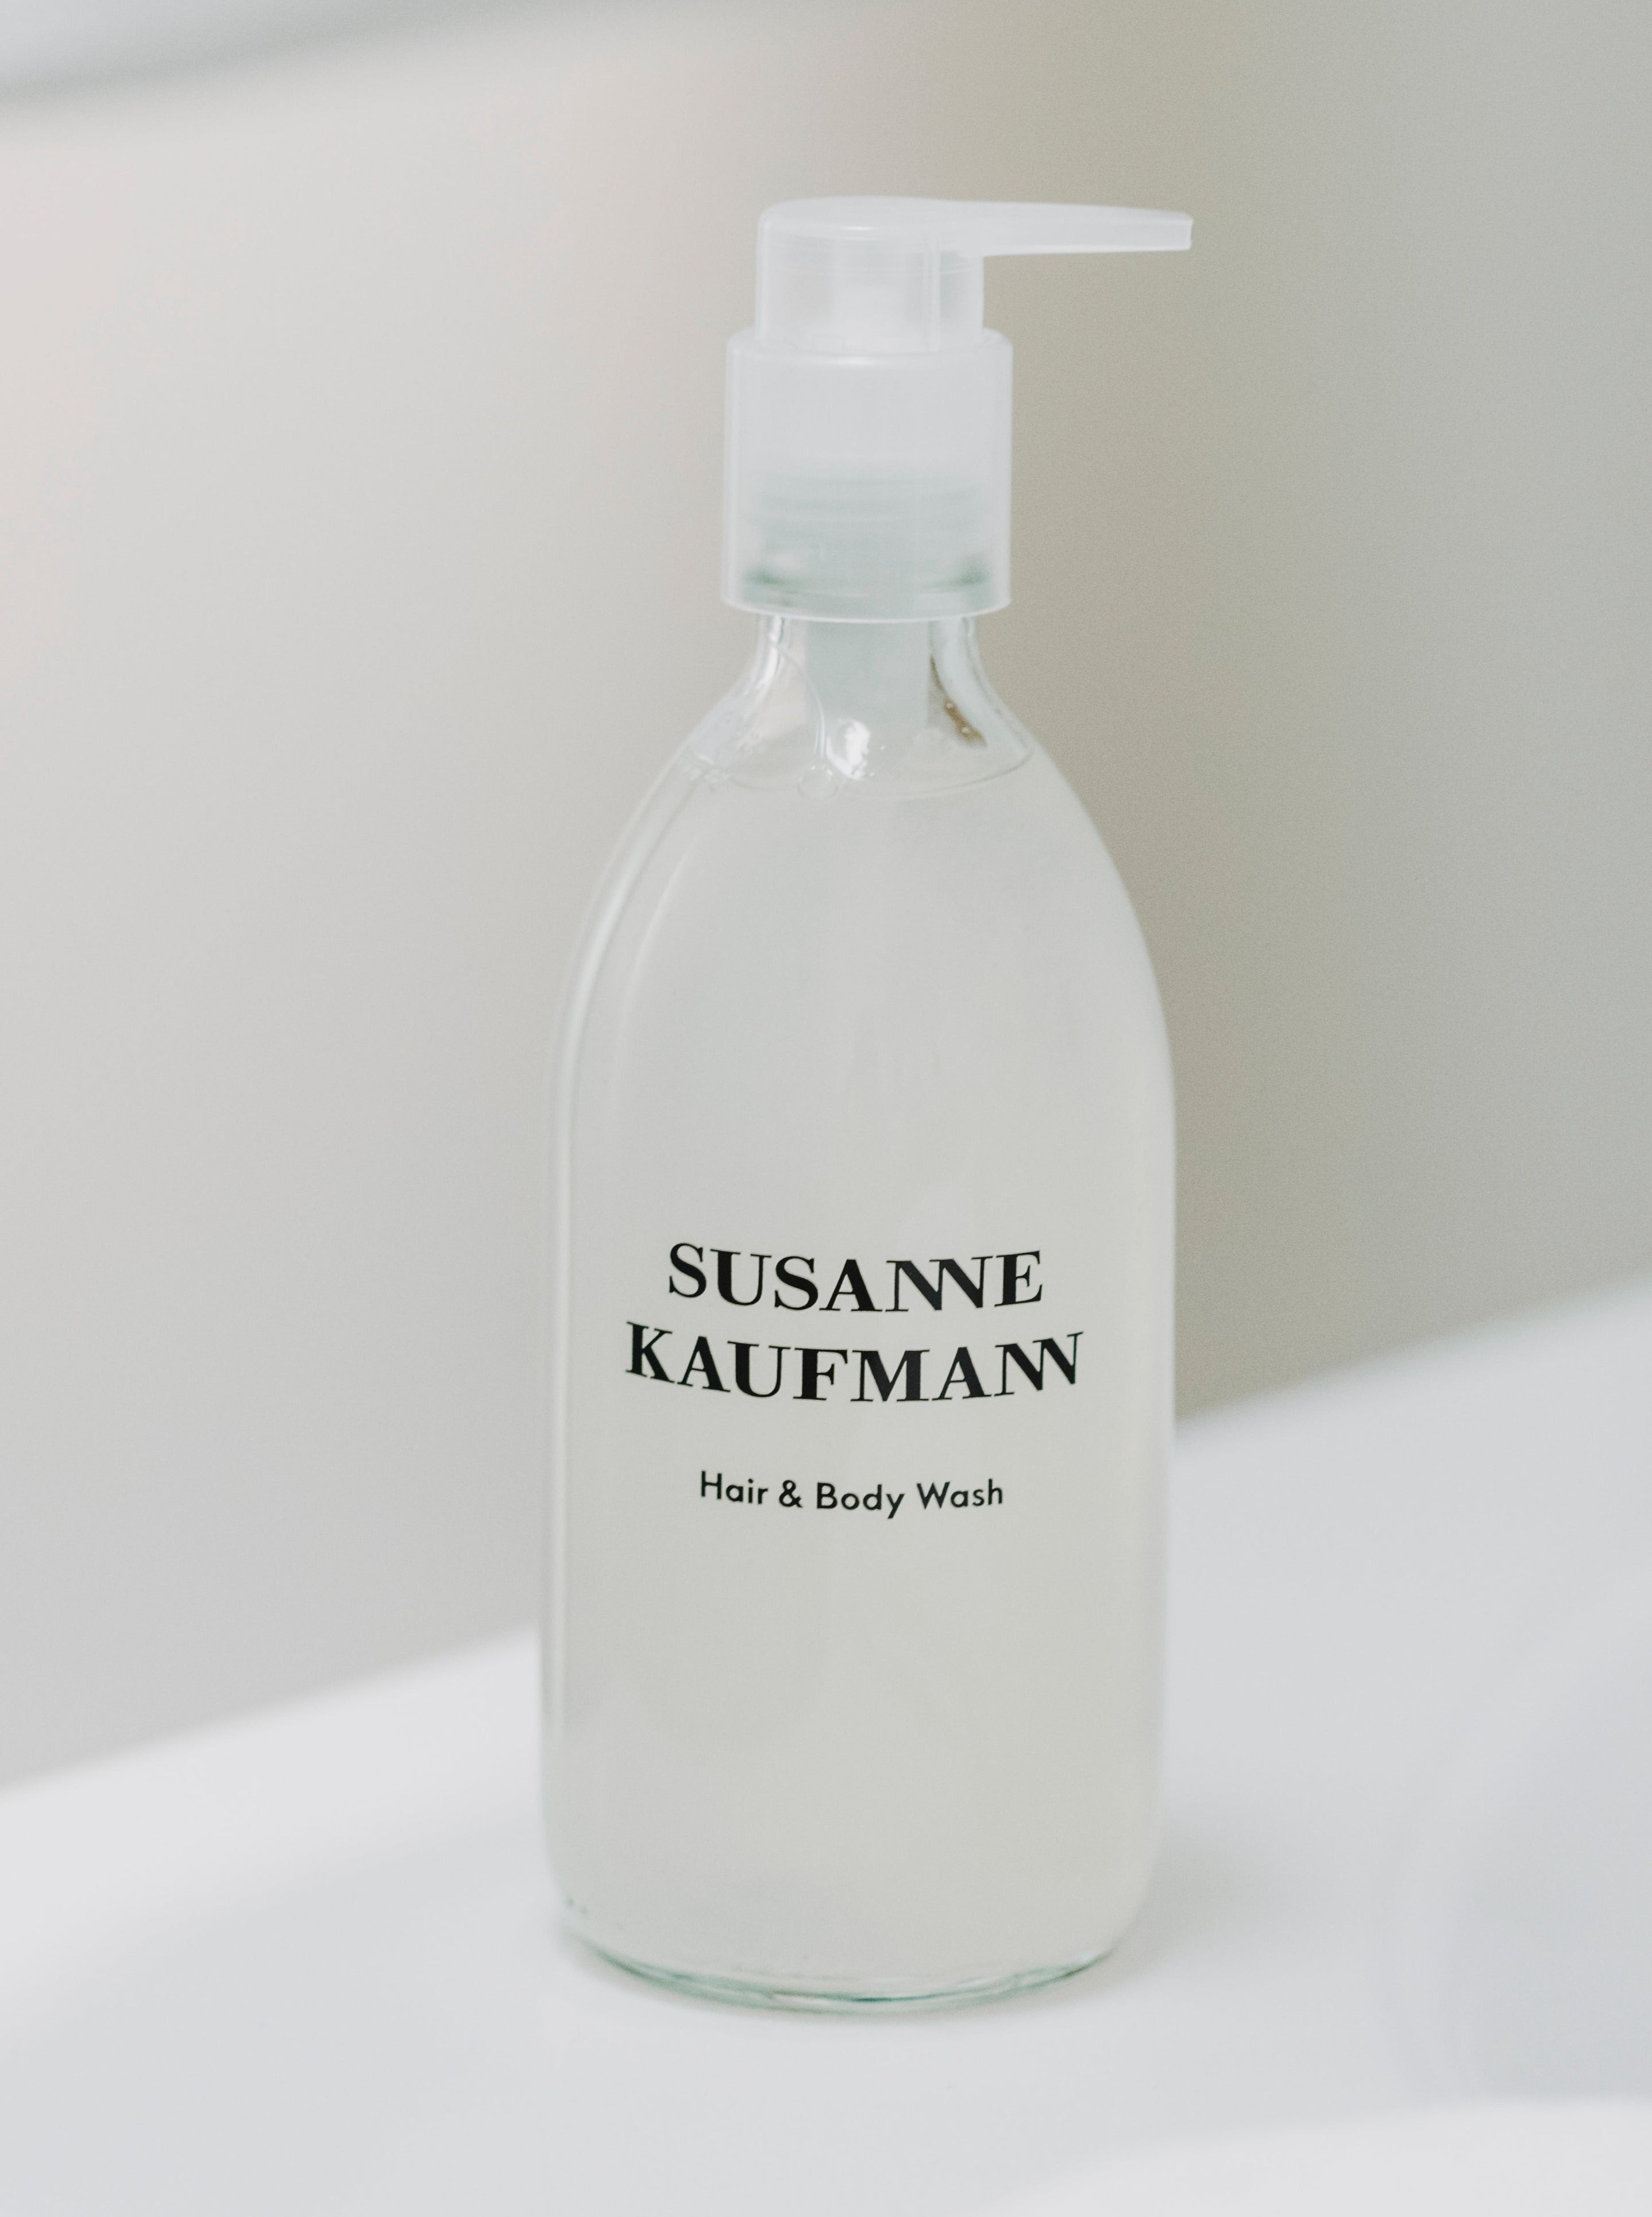 Susanne Kaufmann Hair and Body Wash Mood Picture 